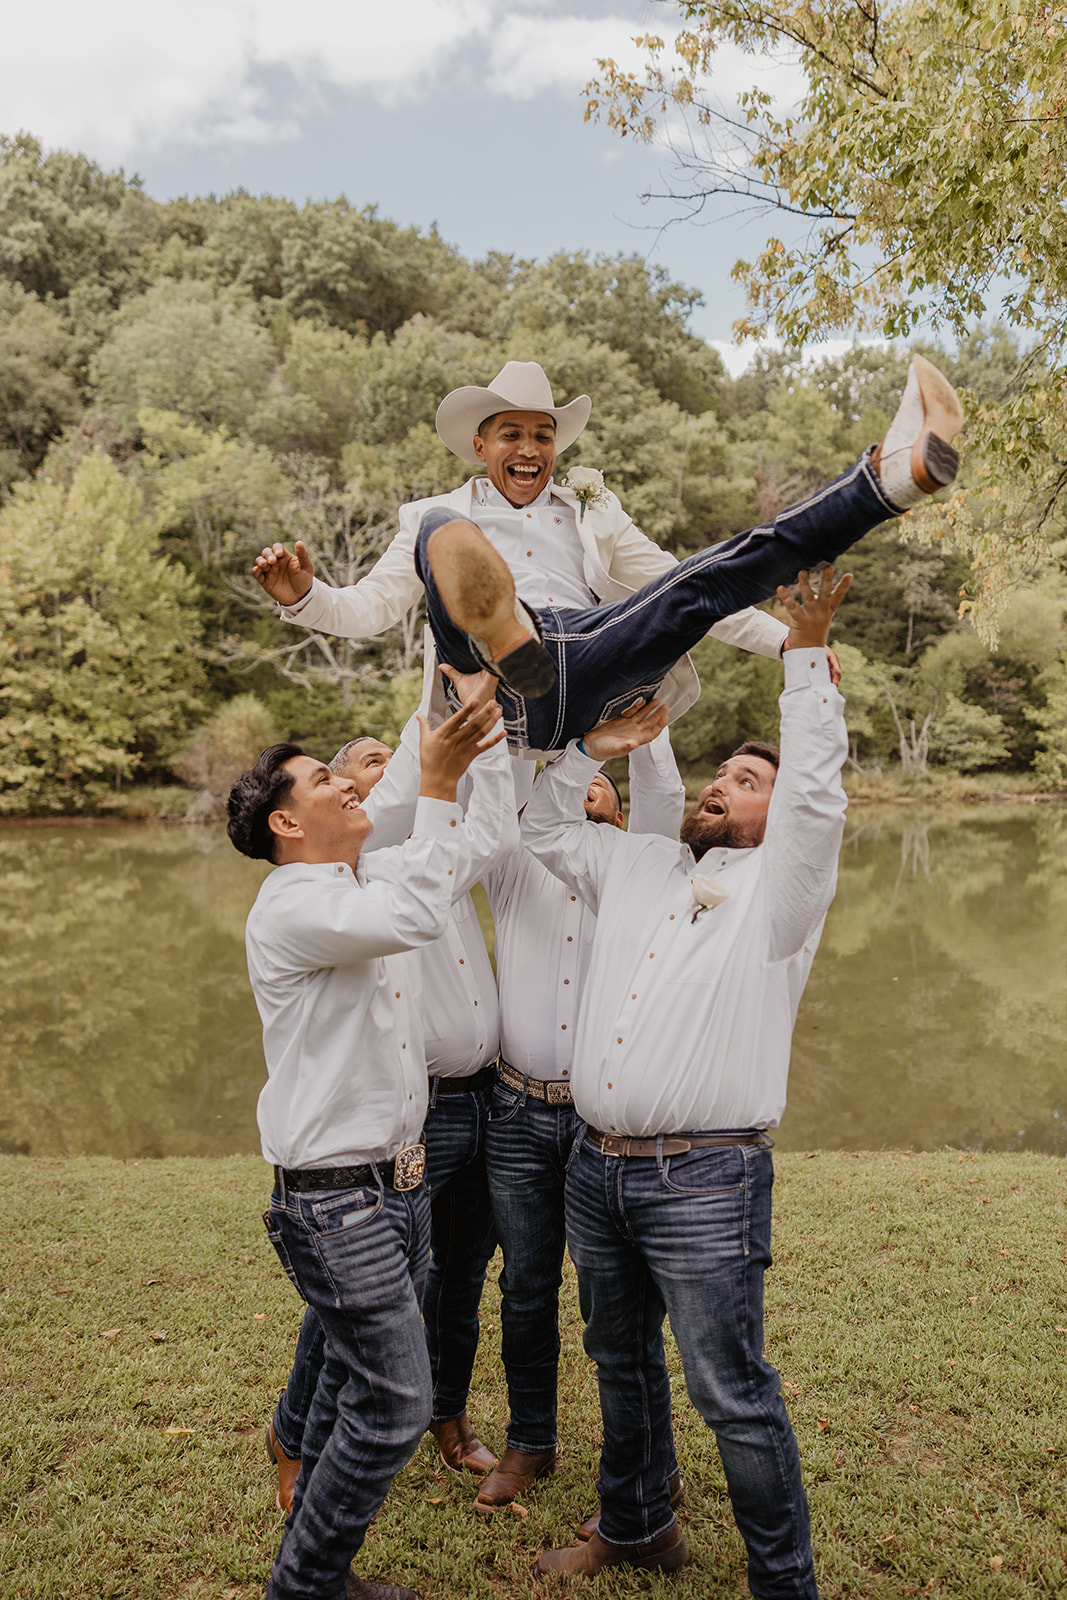 31 Must-Have Wedding Pose Ideas for Your Wedding Day | TN Wedding Photographer